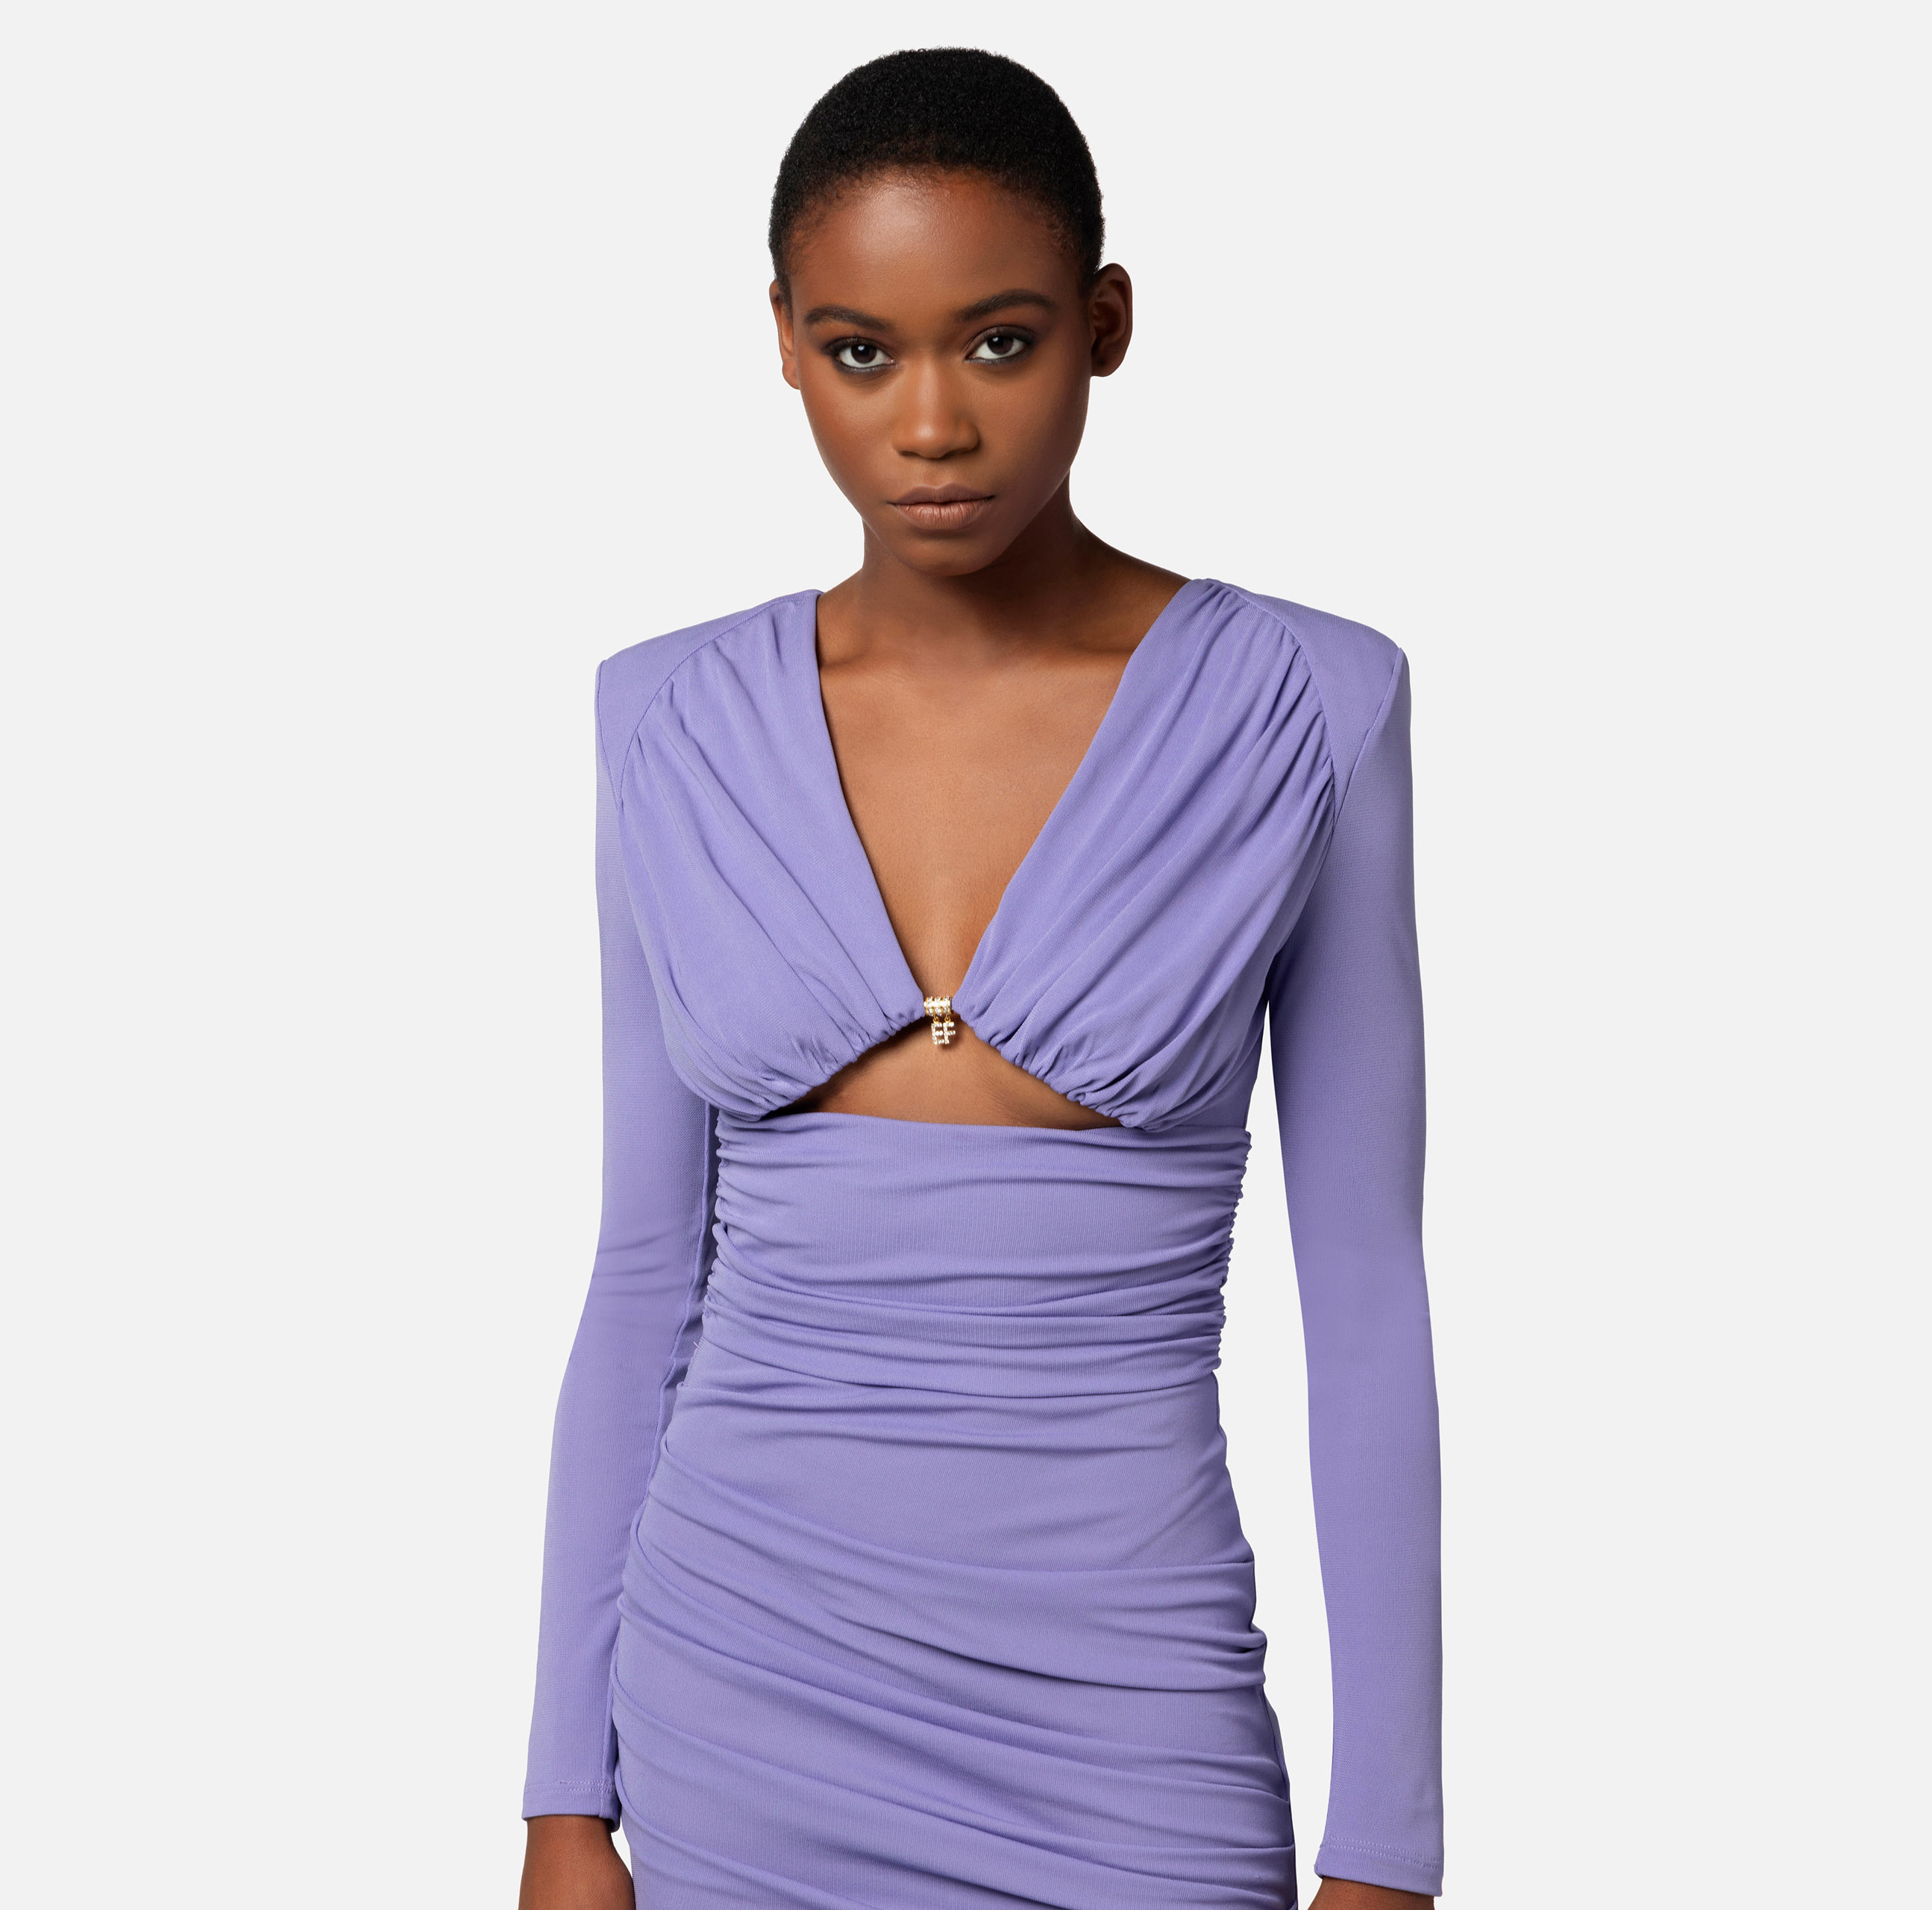 Red carpet dress in draped jersey with cut-out - Elisabetta Franchi